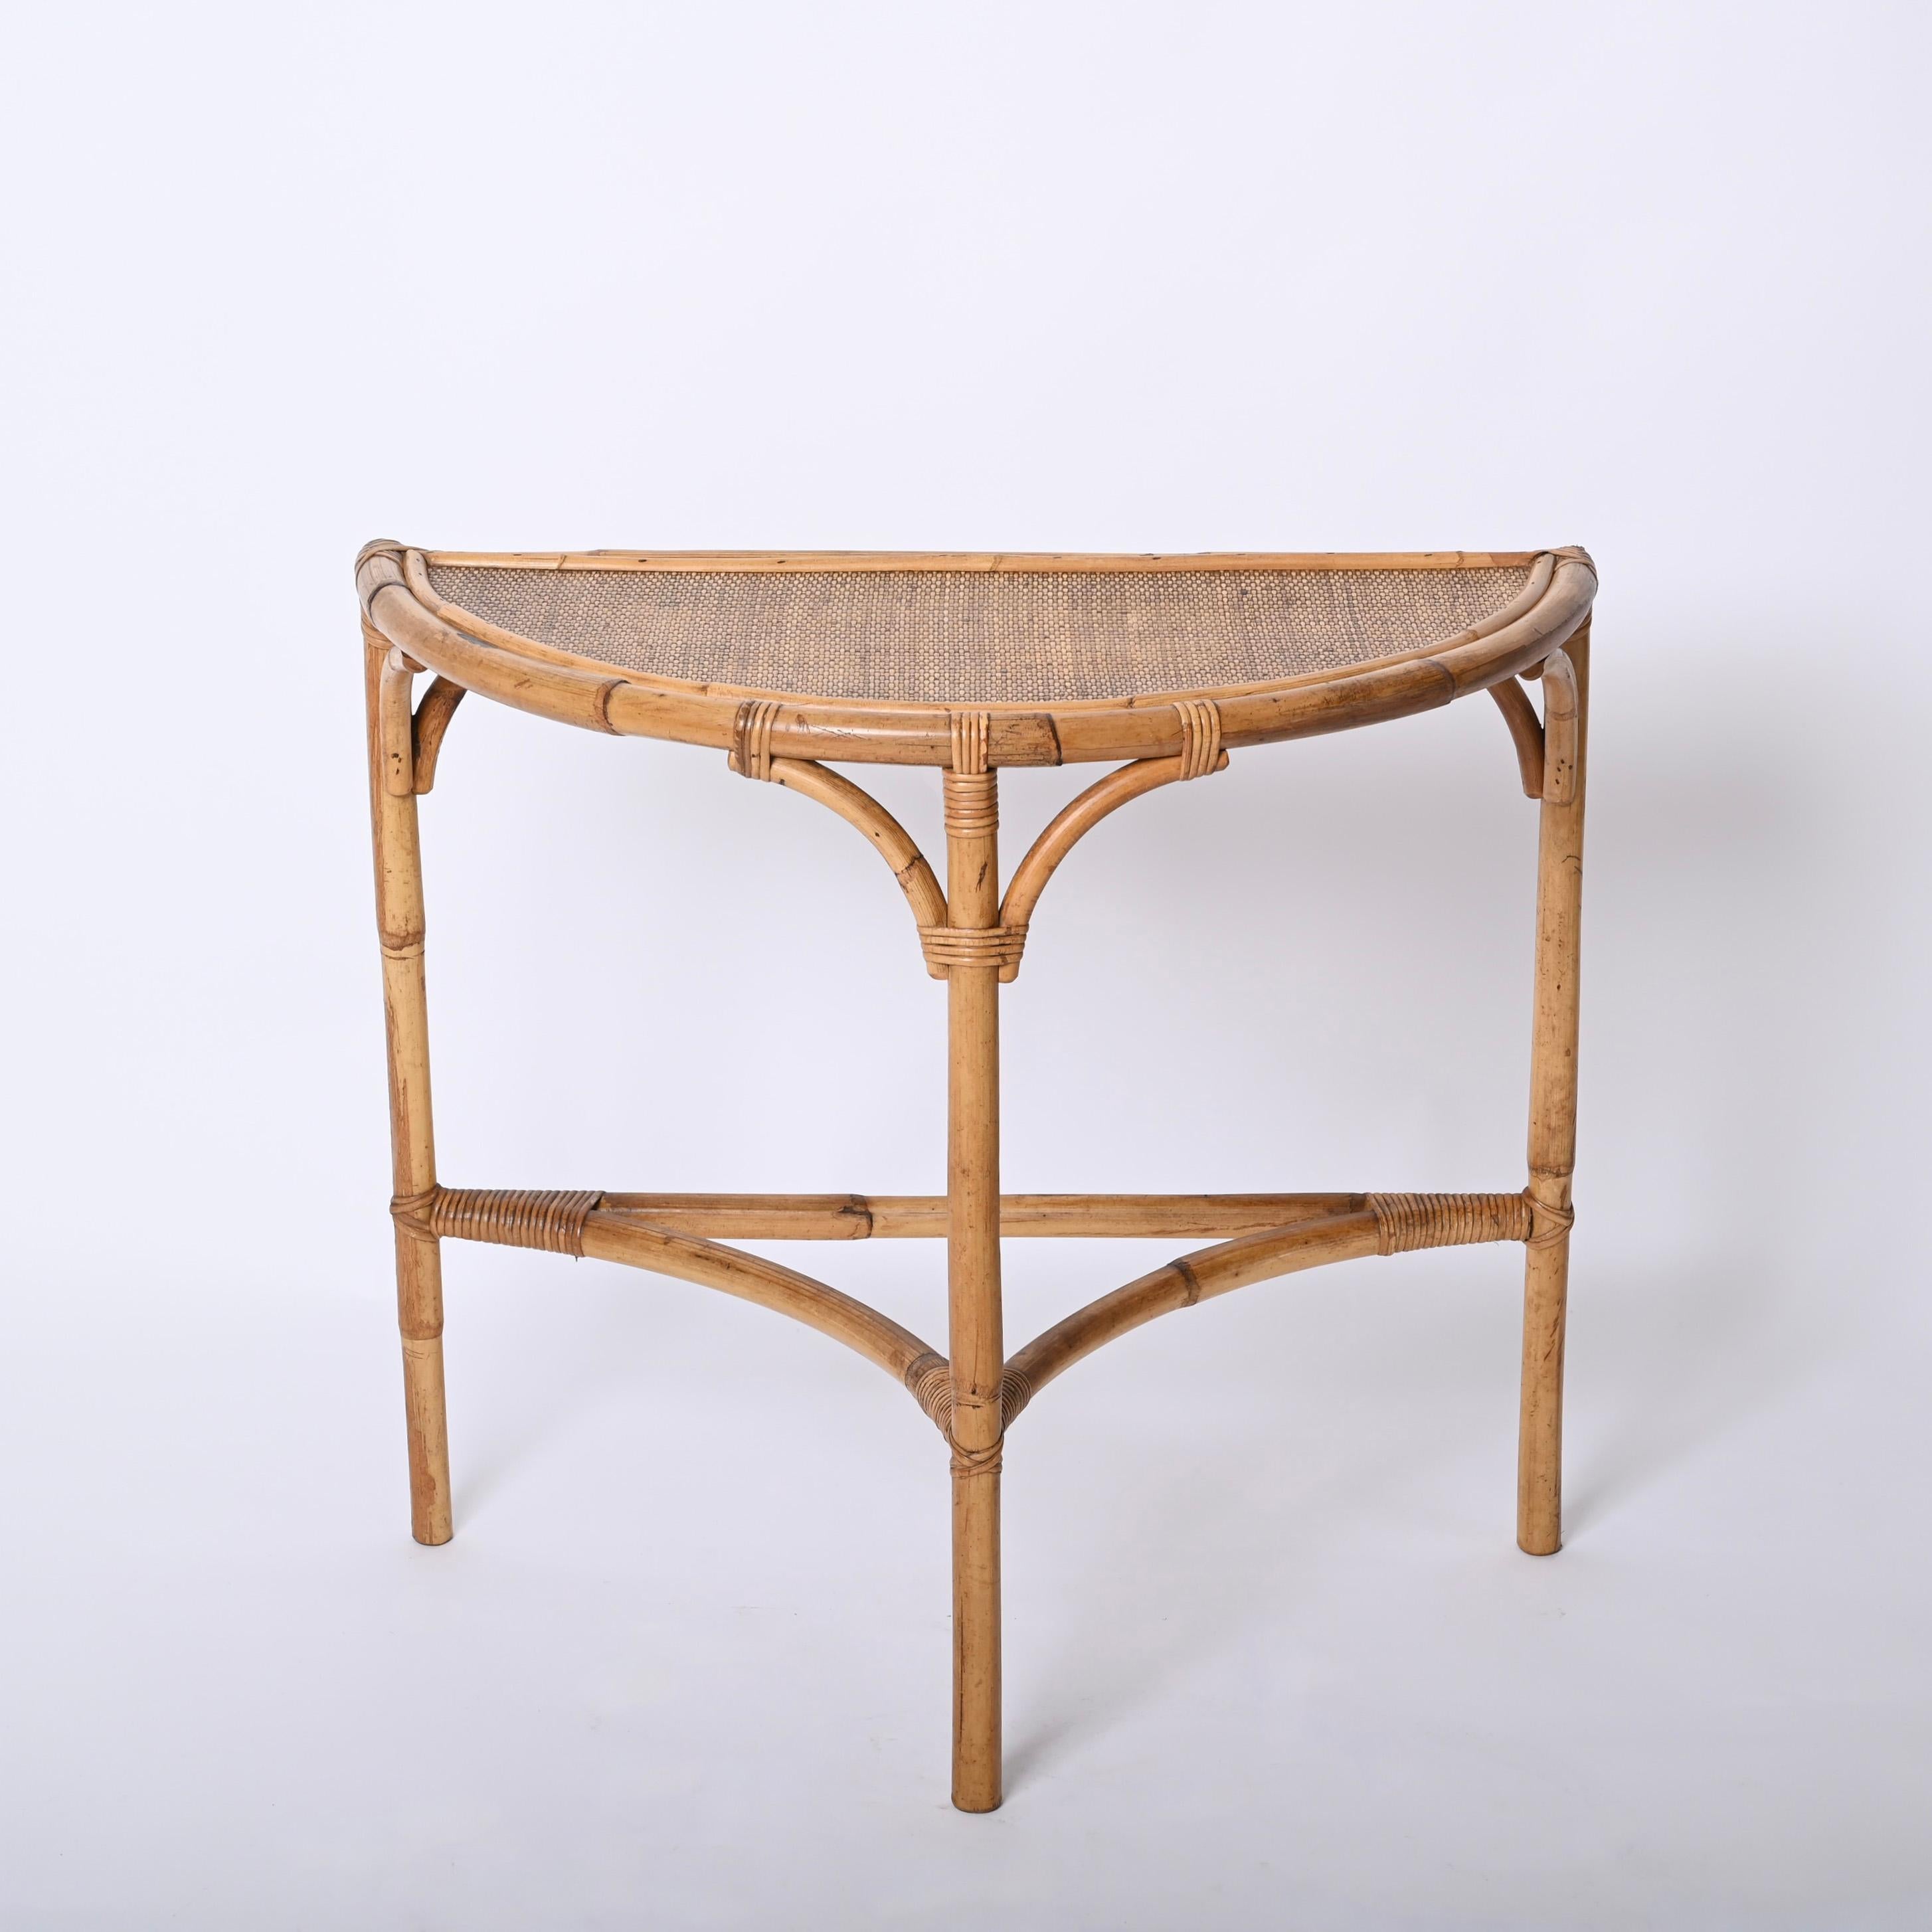 20th Century Midcentury Bamboo and Rattan Arched Console in the Style of Albini, 1970s